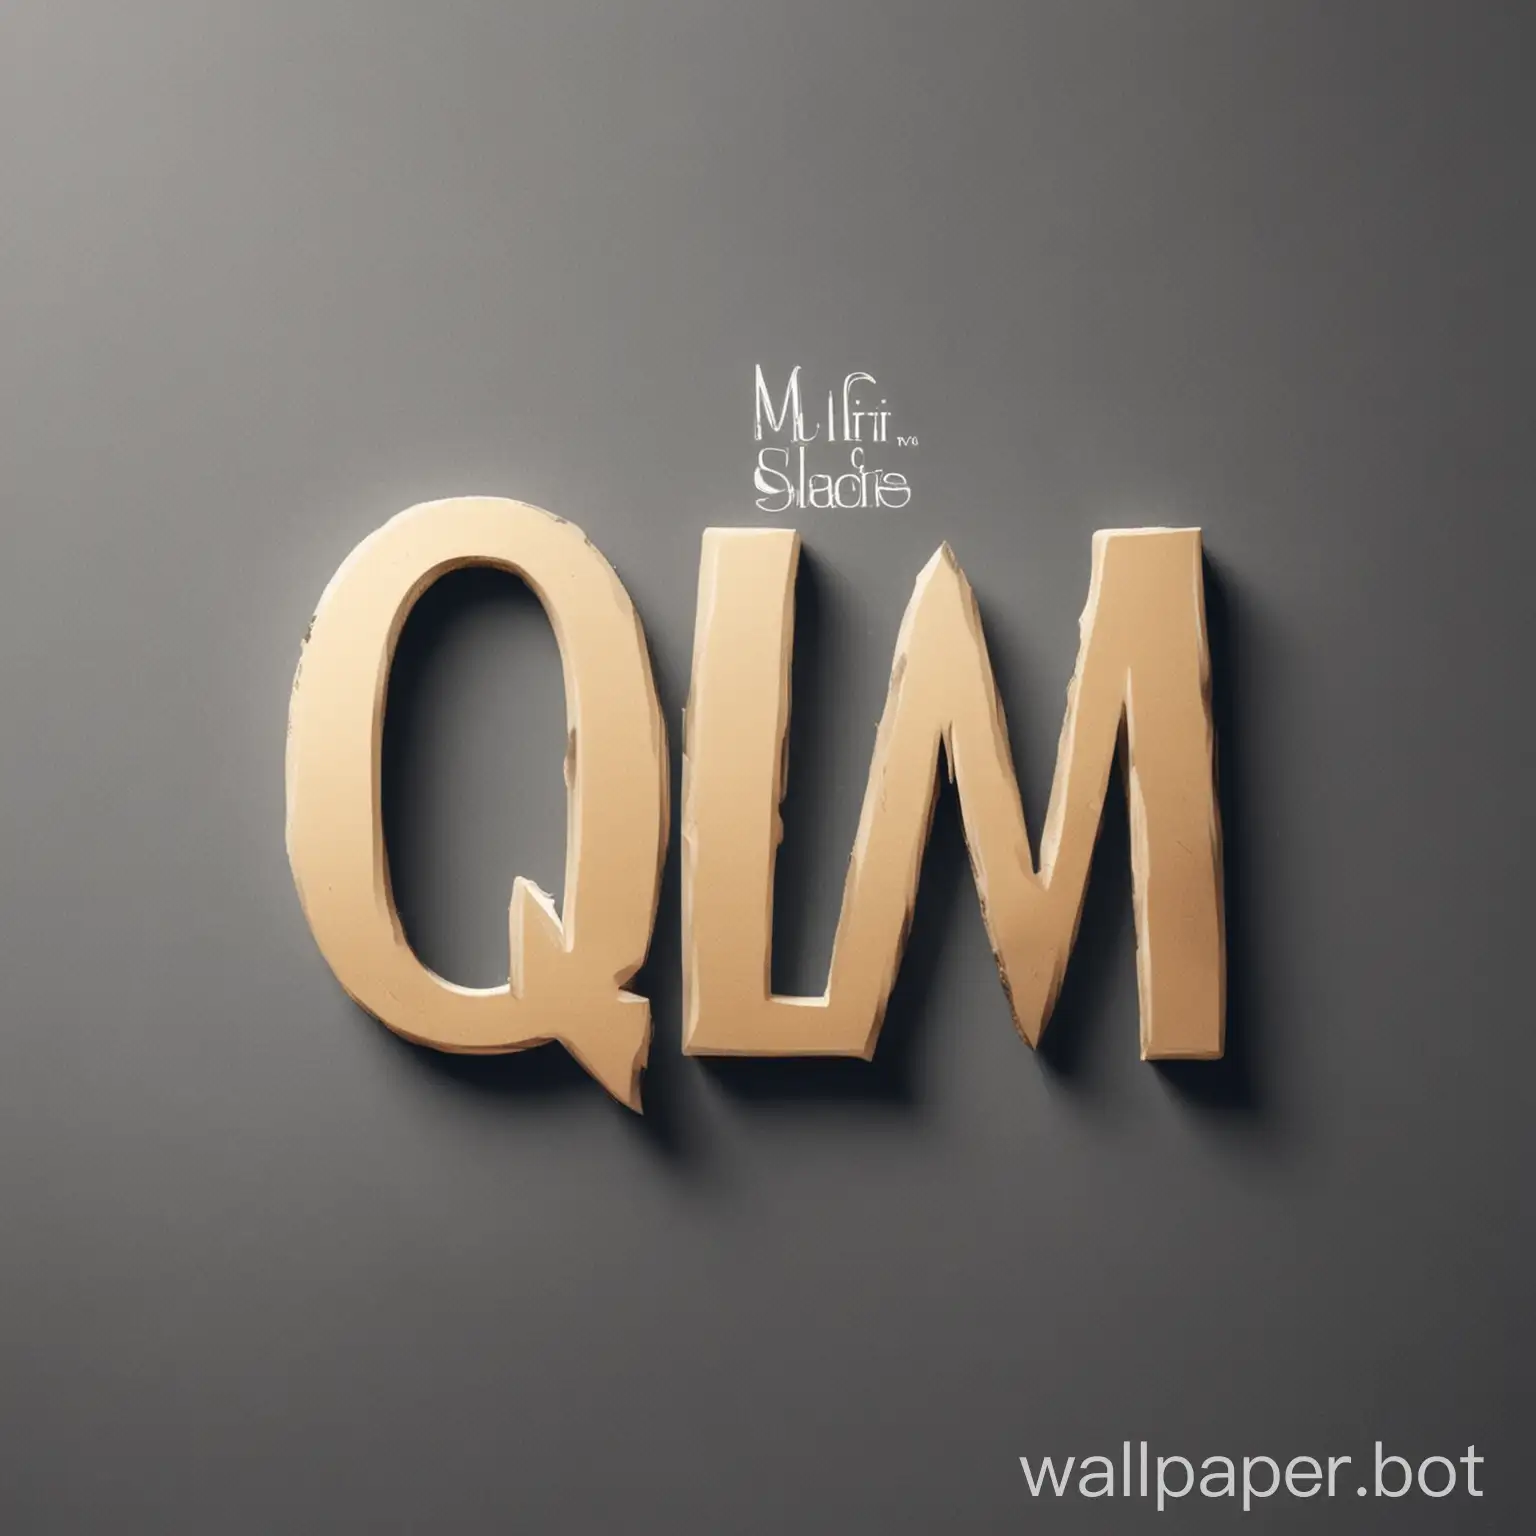 give me a logo in the form of the letters QLM with the name of the brand under the name (Que La Mif)